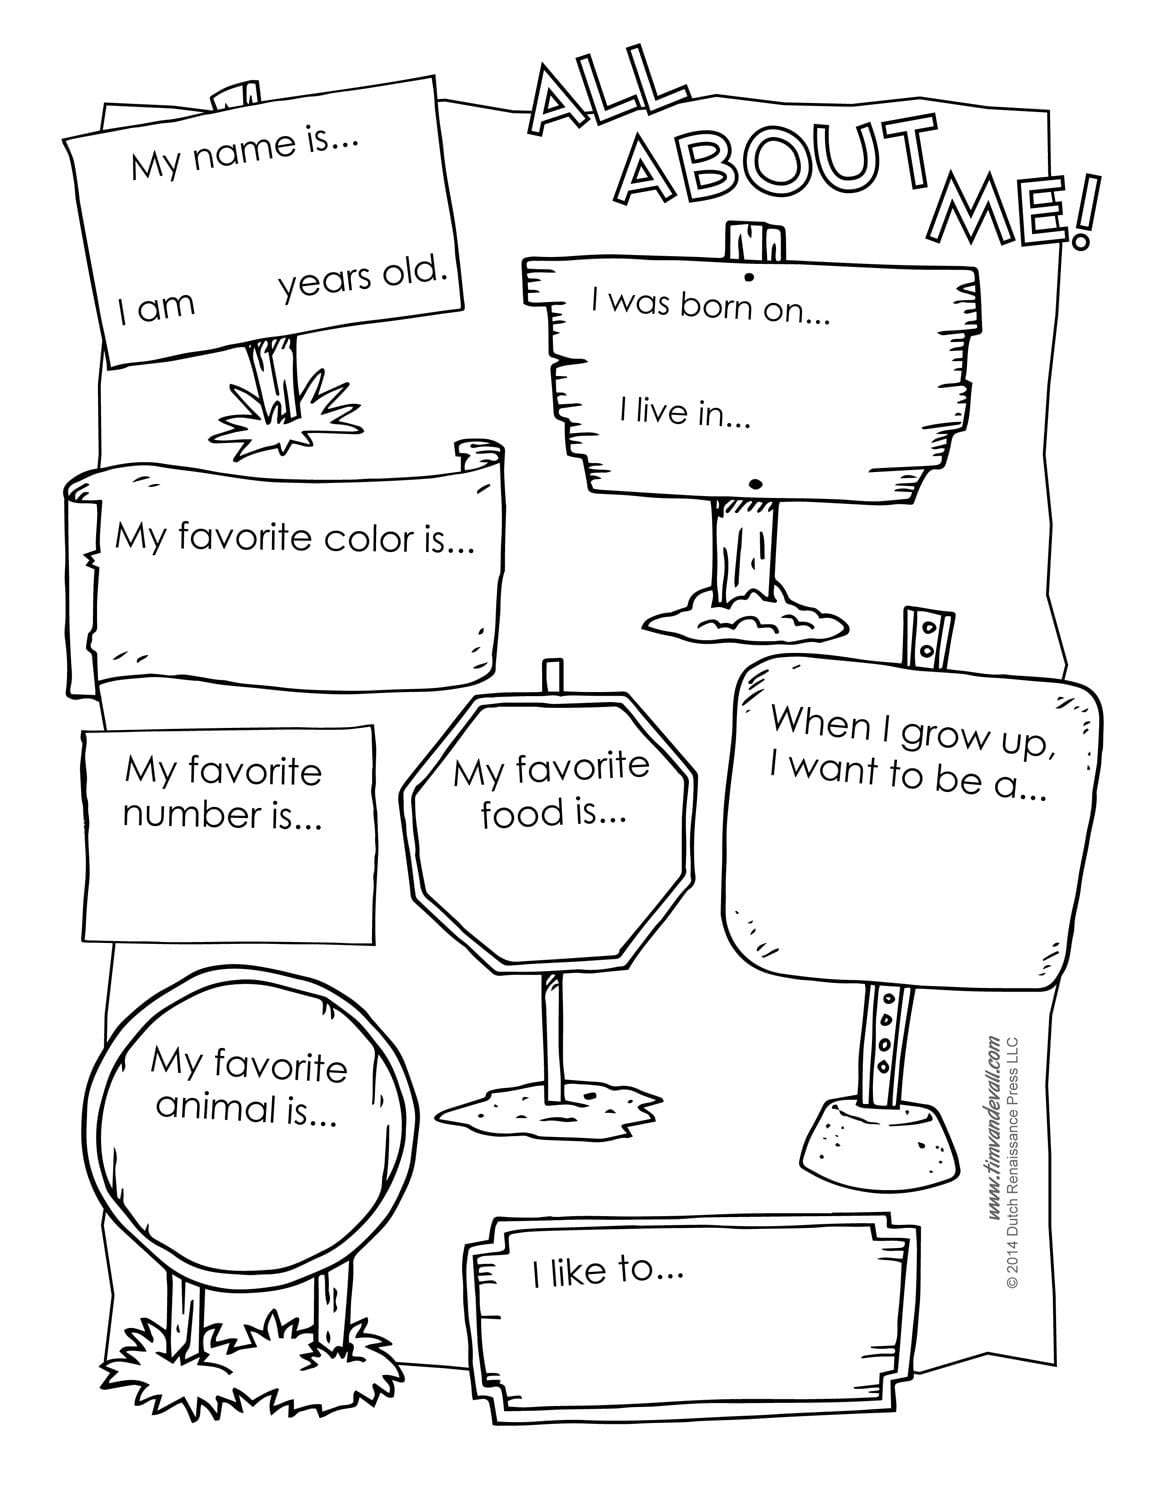 Printable All About Me Poster  All About Me Template Pdf Throughout All About Me Worksheet Middle School Pdf